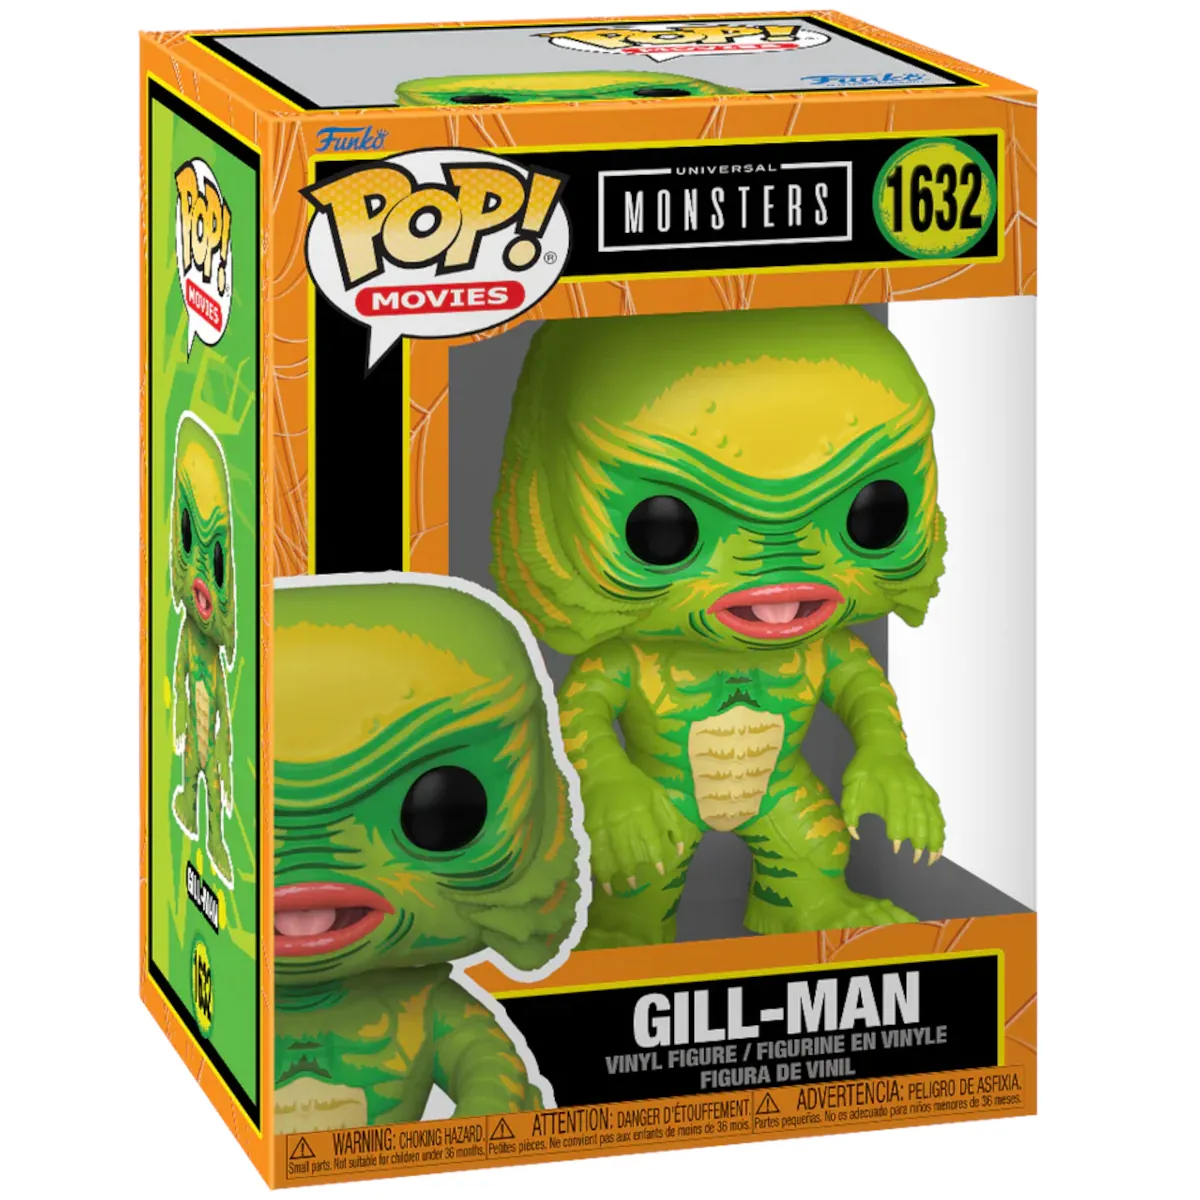 80998 Funko Pop! Movies - Universal Monsters - Gill-Man (Deco) Collectable Vinyl Figure Box Front